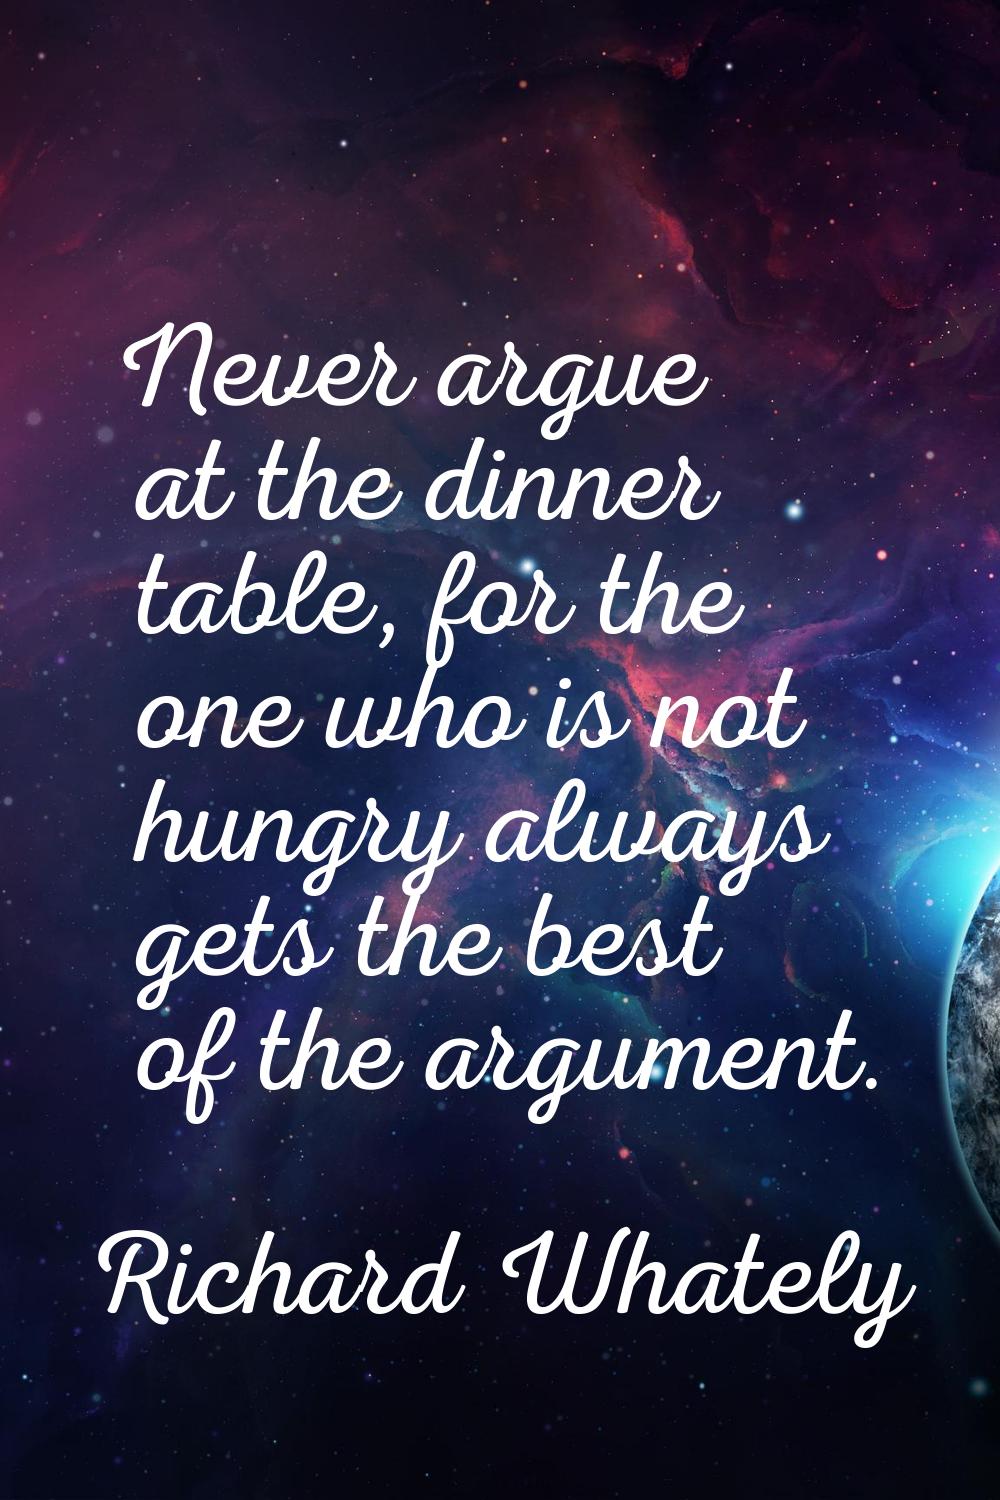 Never argue at the dinner table, for the one who is not hungry always gets the best of the argument